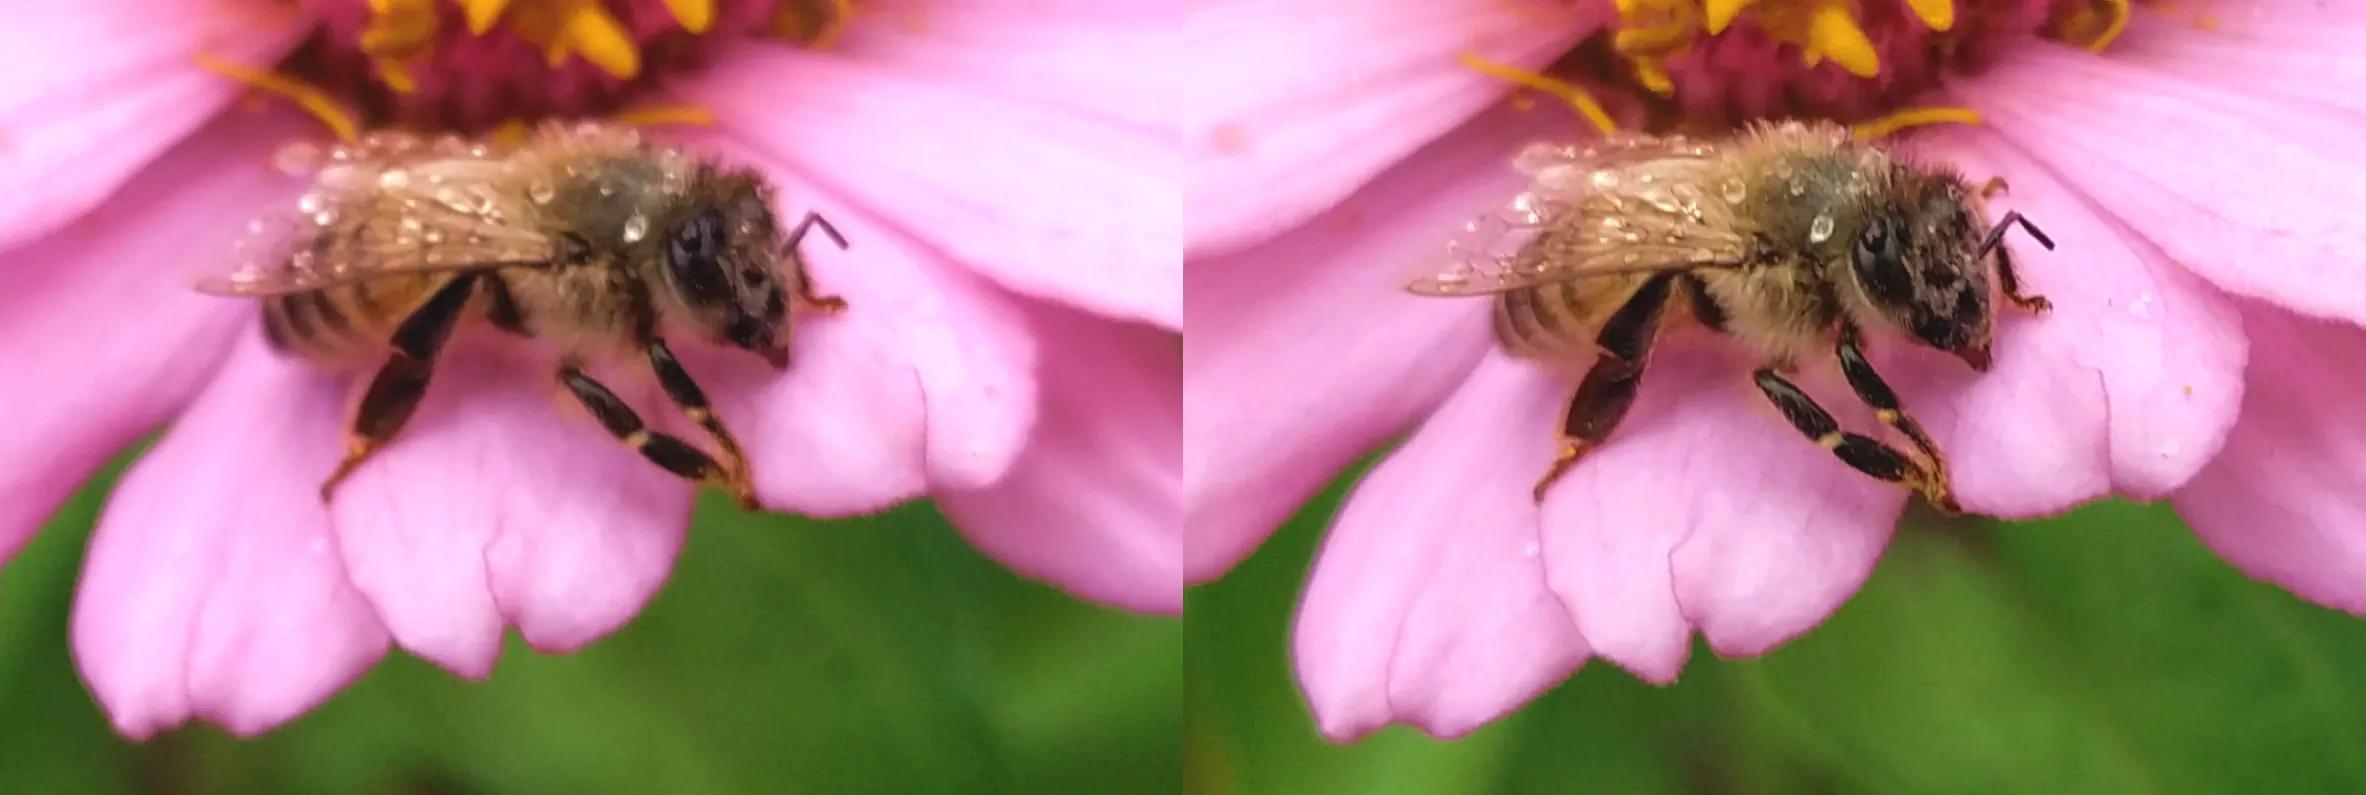 Bee with raindrops